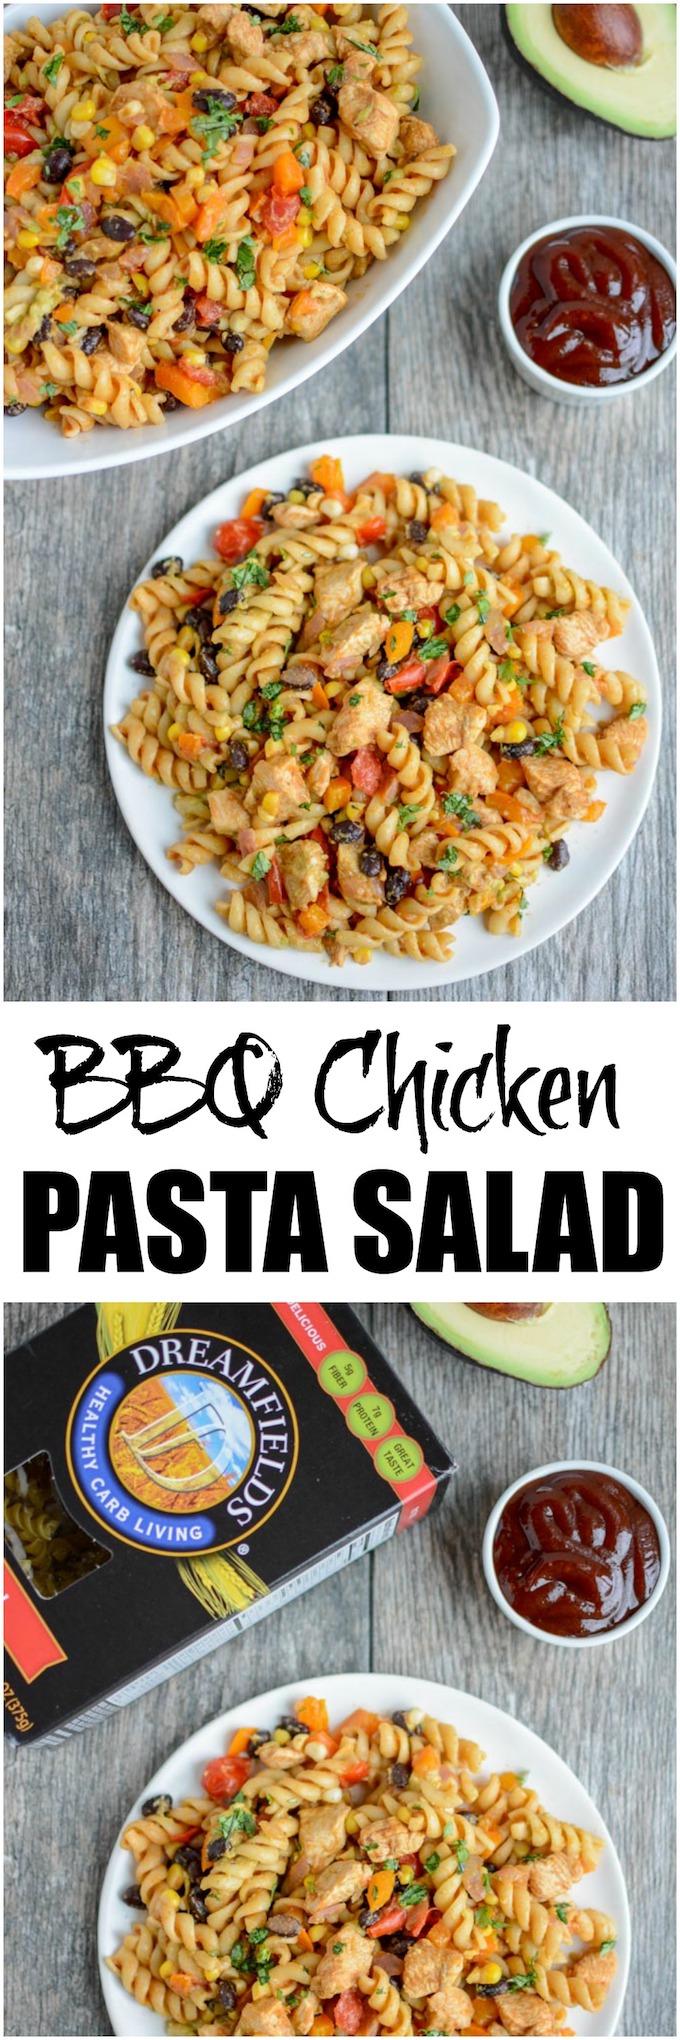 This BBQ Chicken Pasta Salad is perfect for everything from dinner on a hot night to a summer picnic or cookout. It's packed with protein, fiber, and vegetables and can be made ahead of time!